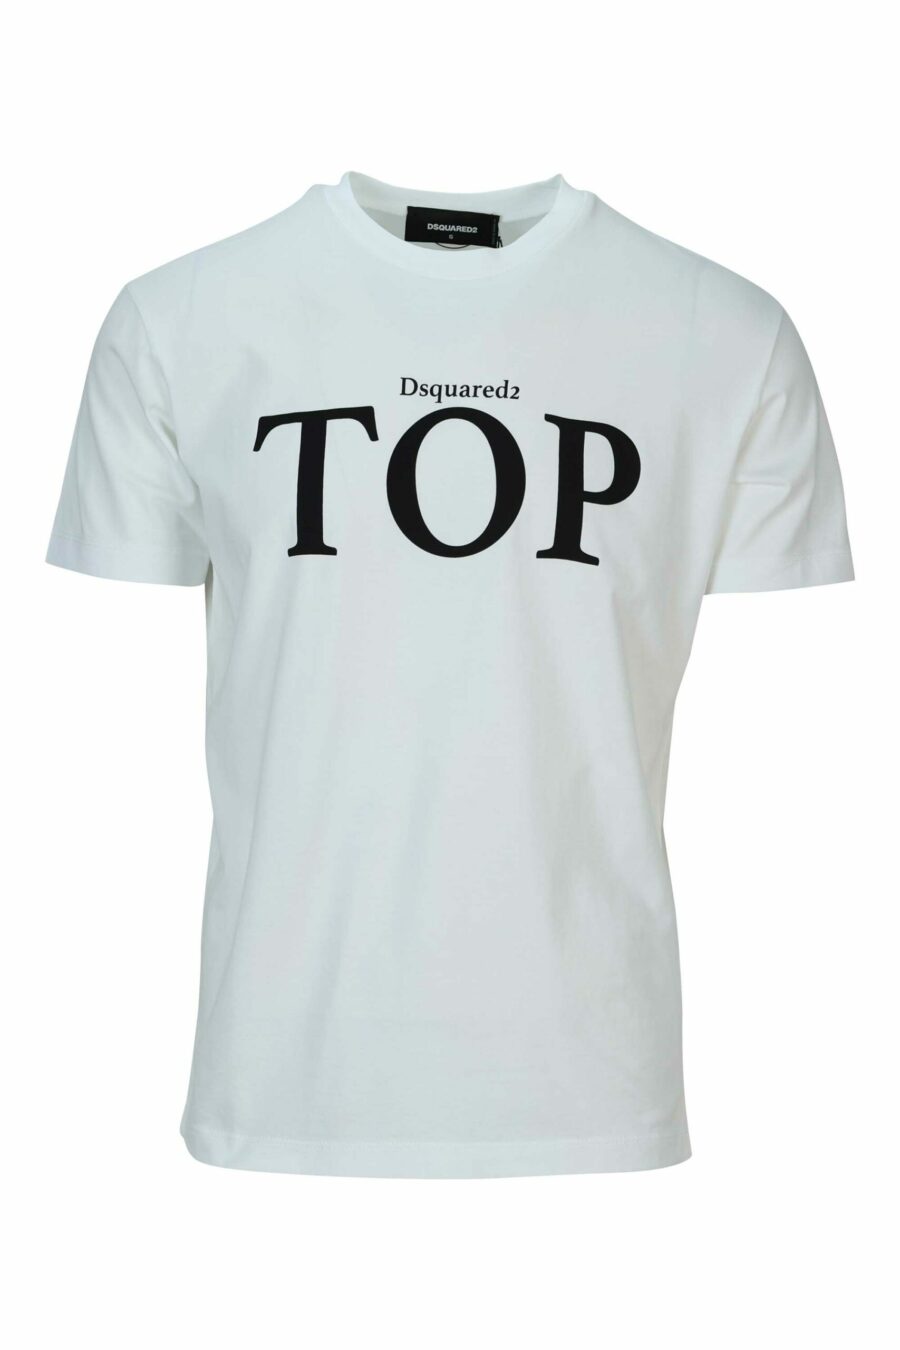 White T-shirt with maxilogue "top" - 8054148570866 scaled